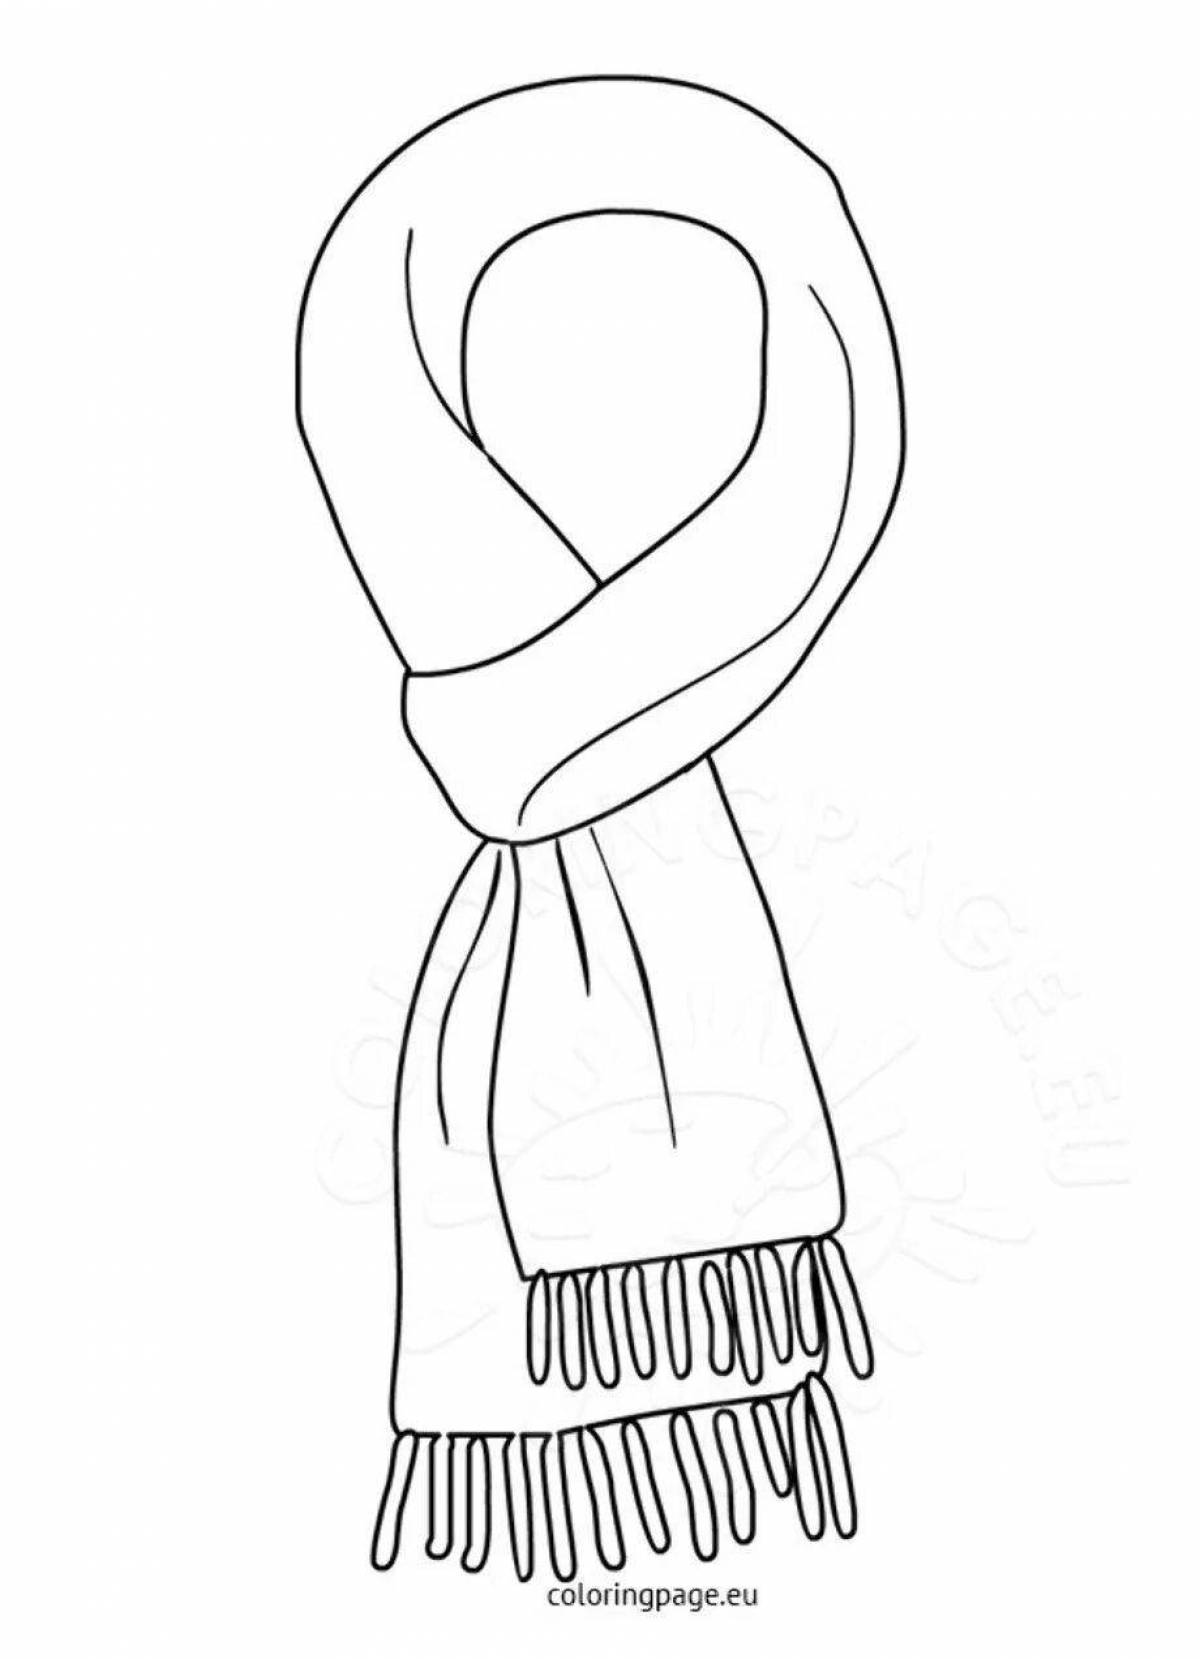 Fun coloring scarf for 3-4 year olds